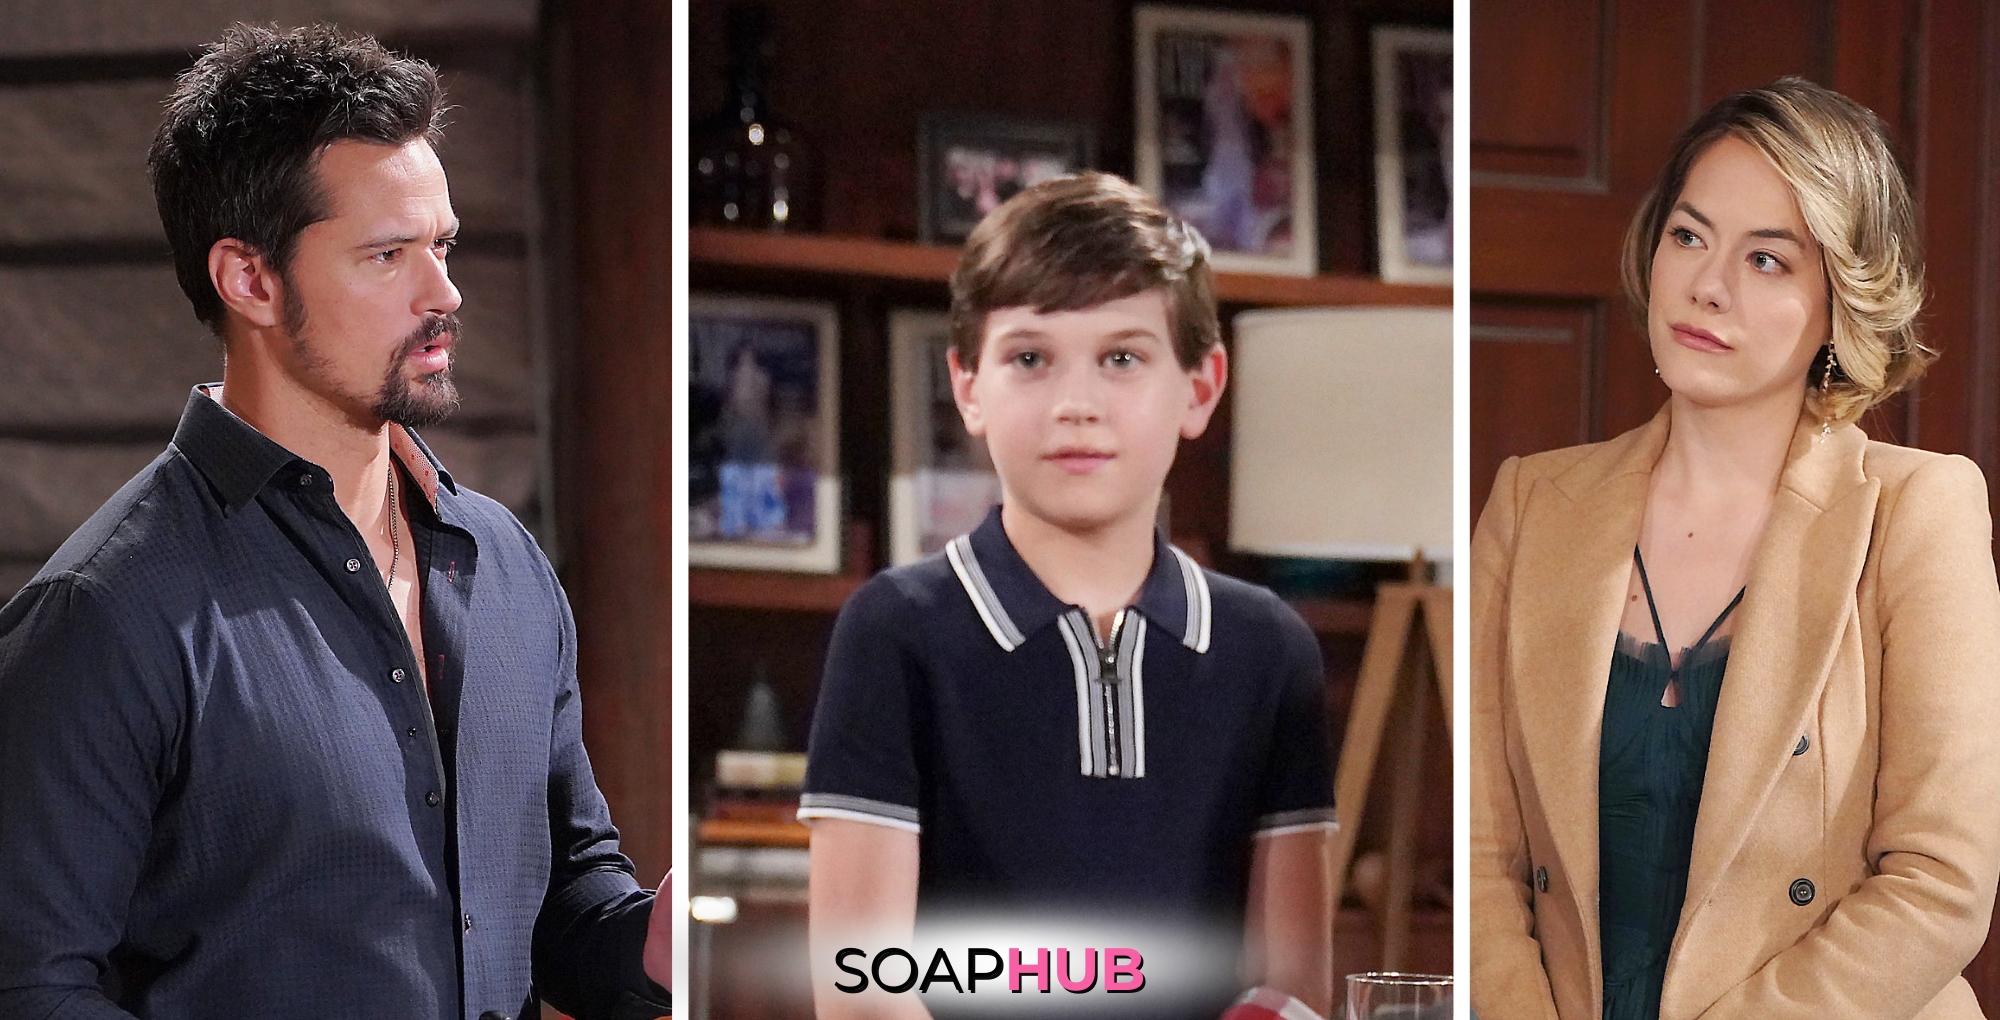 Bold and the Beautiful Spoilers for Thursday, March 28 Episode 9238 Feature Thomas, Douglas and Hope with the Soap Hub Logo Across the Bottom